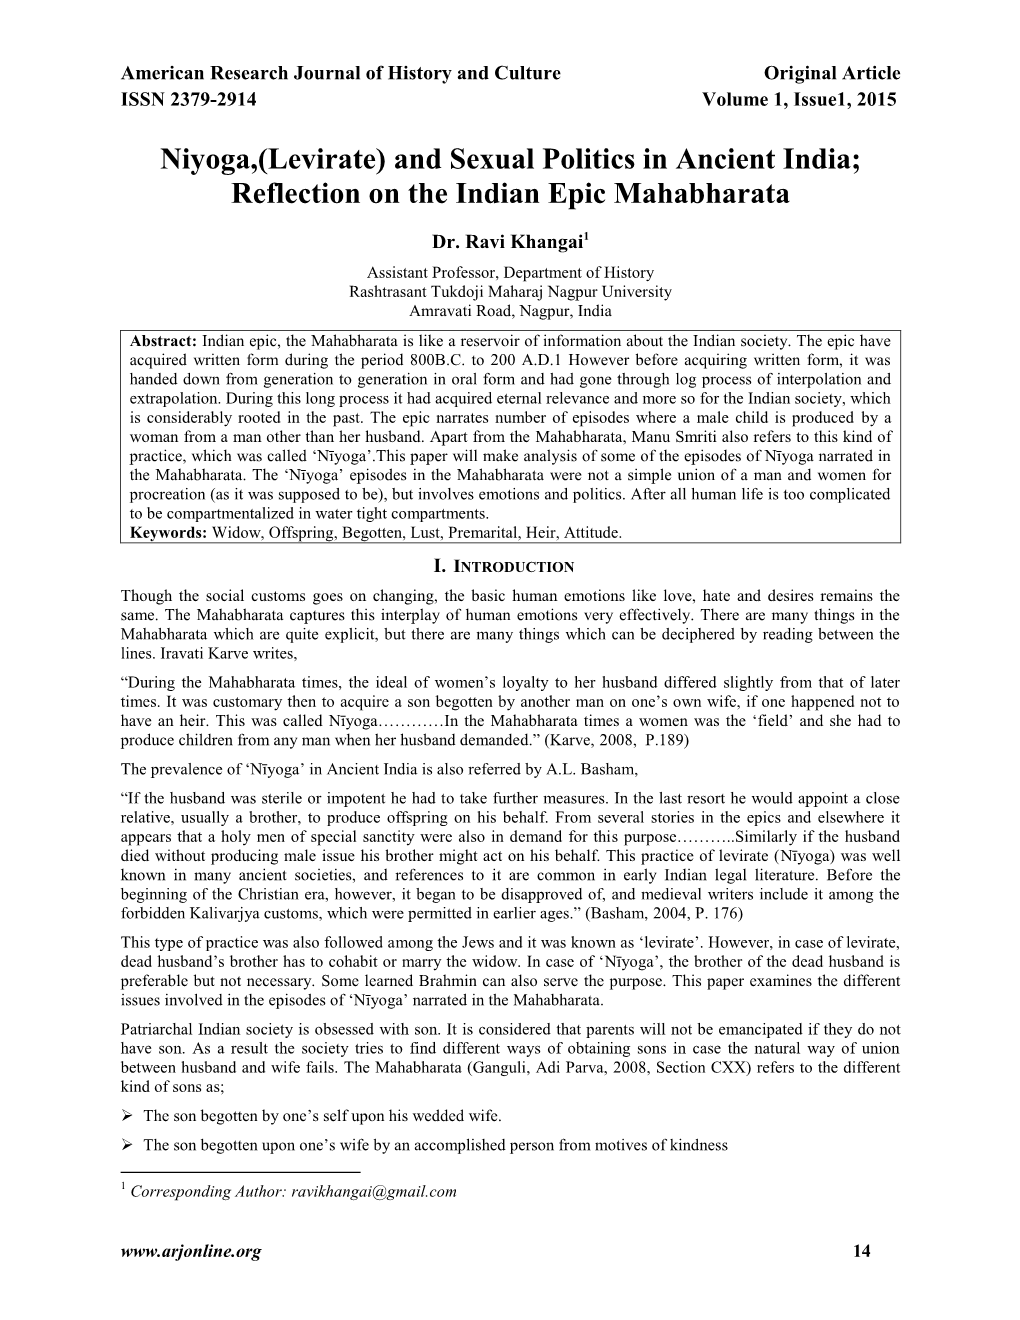 Niyoga,(Levirate) and Sexual Politics in Ancient India; Reflection on the Indian Epic Mahabharata